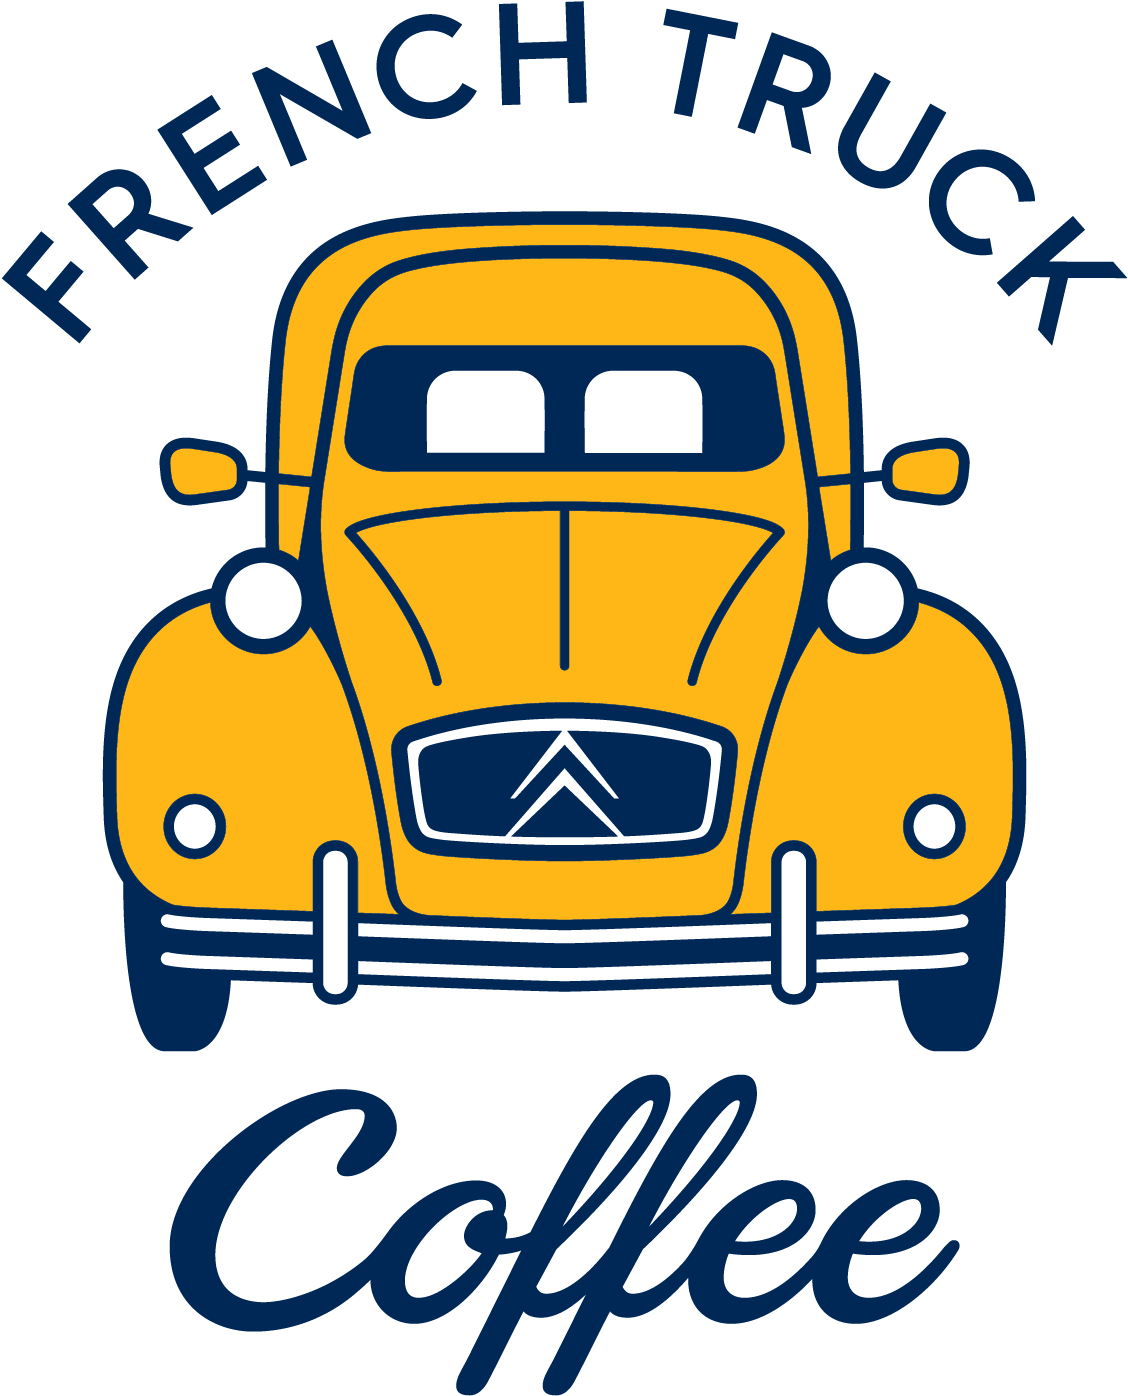 Explore Low Carb, Illustration Art, And More - French Truck Coffee Logo (1304x1779)